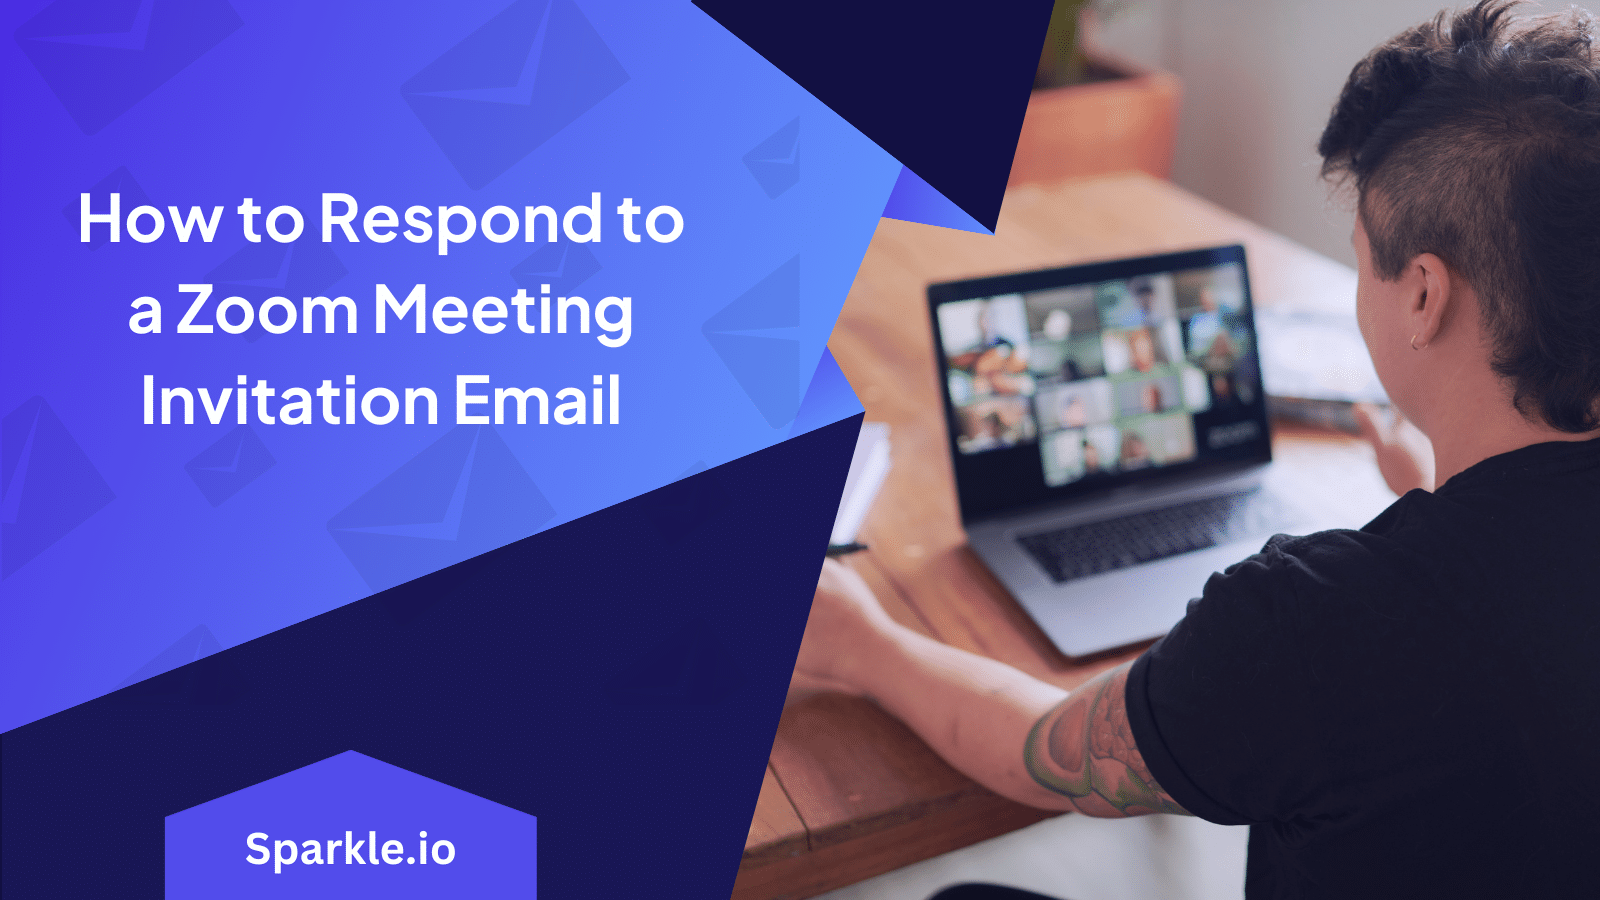 How to Respond to a Zoom Meeting Invitation Email